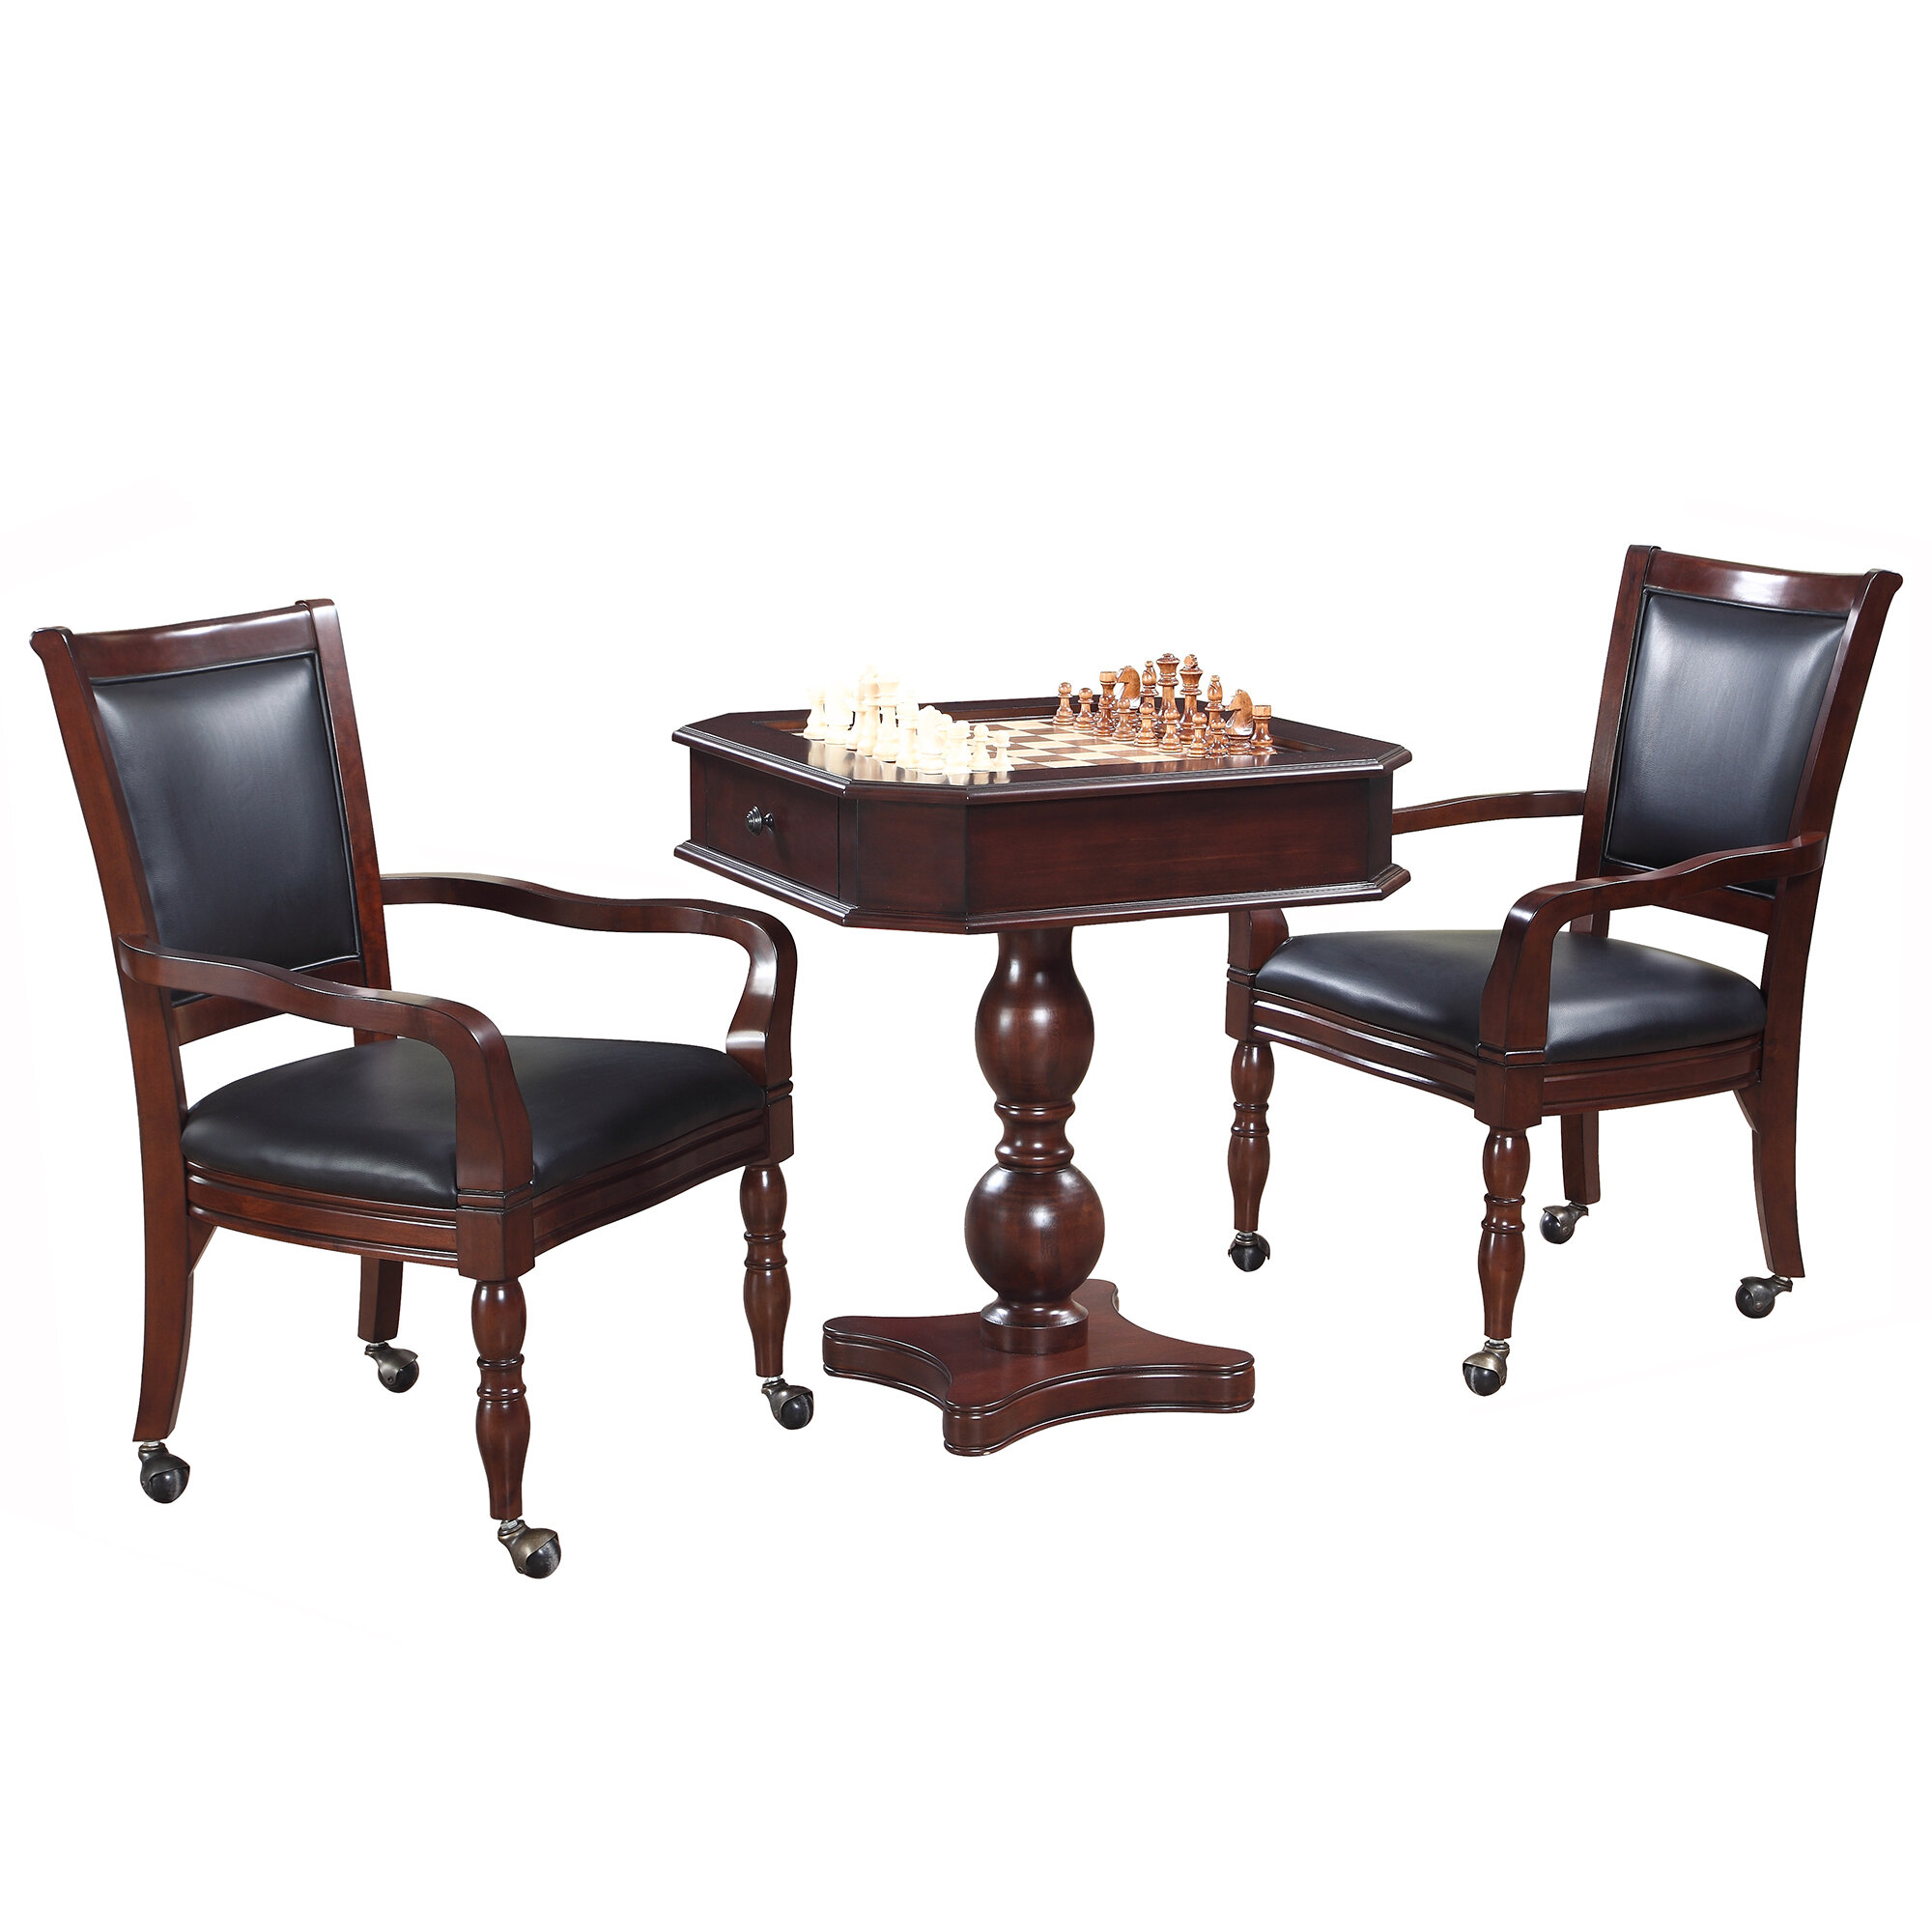 Hathaway Games 28 Chess Backgammon Table With Chairs Reviews